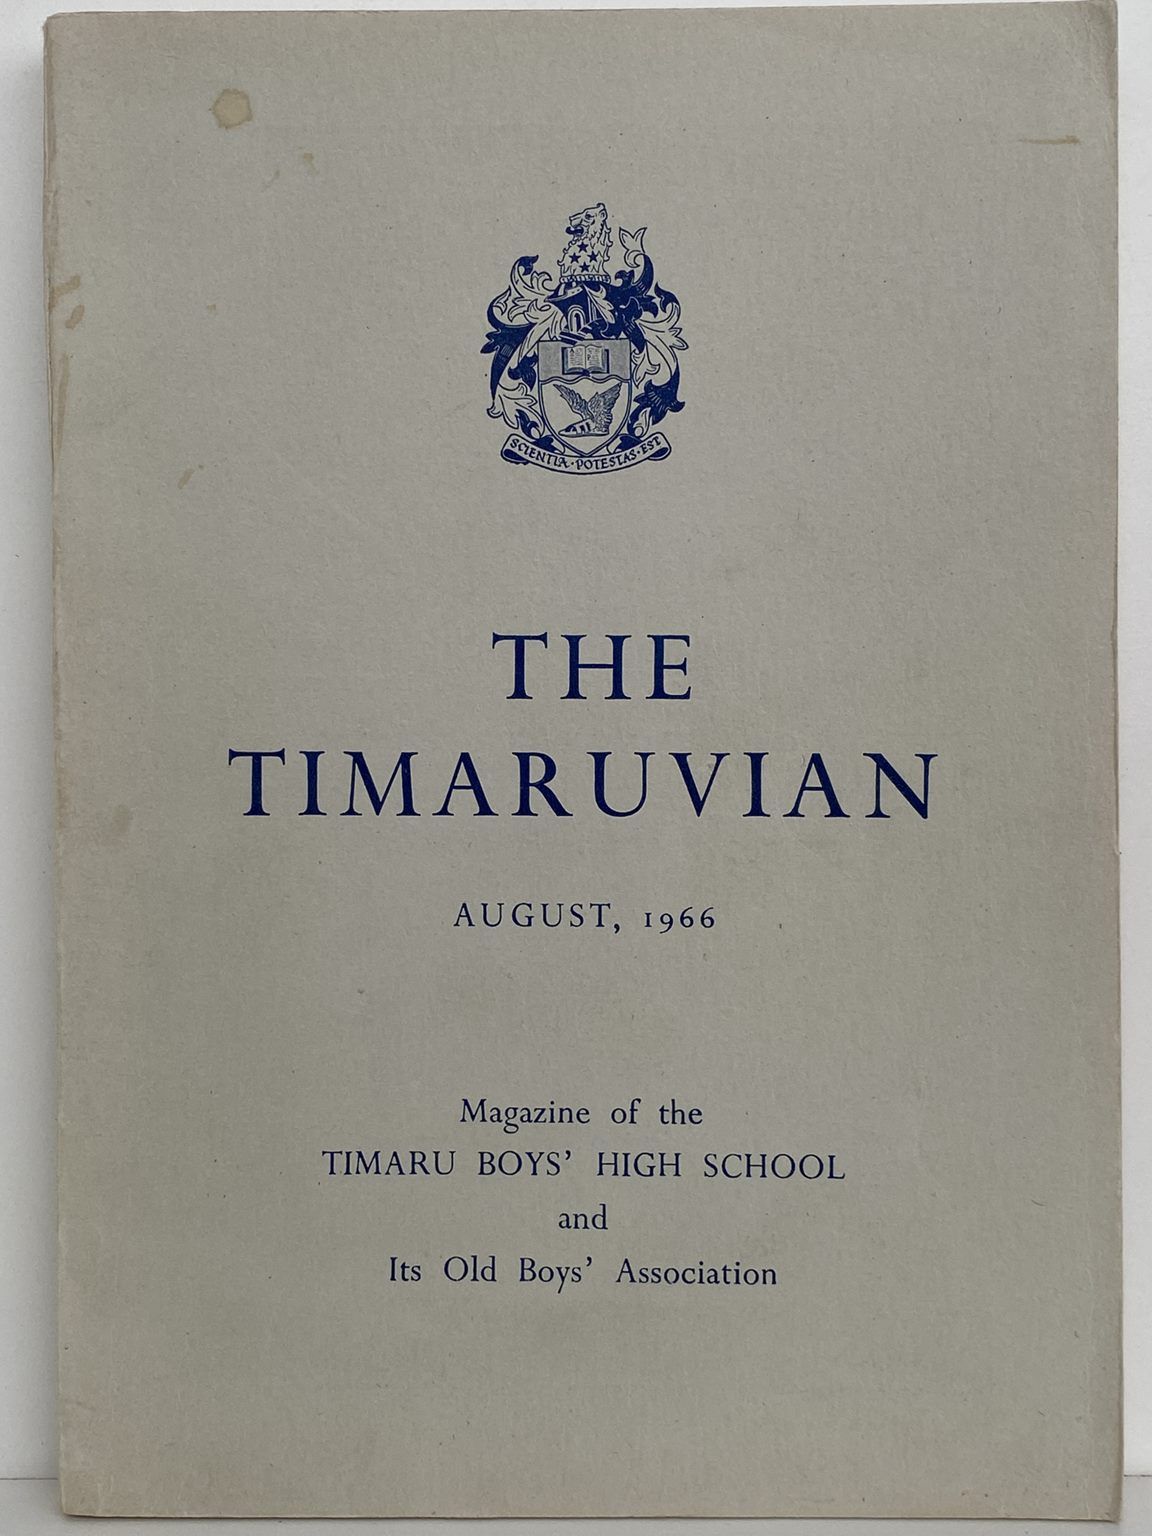 THE TIMARUVIAN: Magazine of the Timaru Boys' High School and its Old Boys' Association 1966